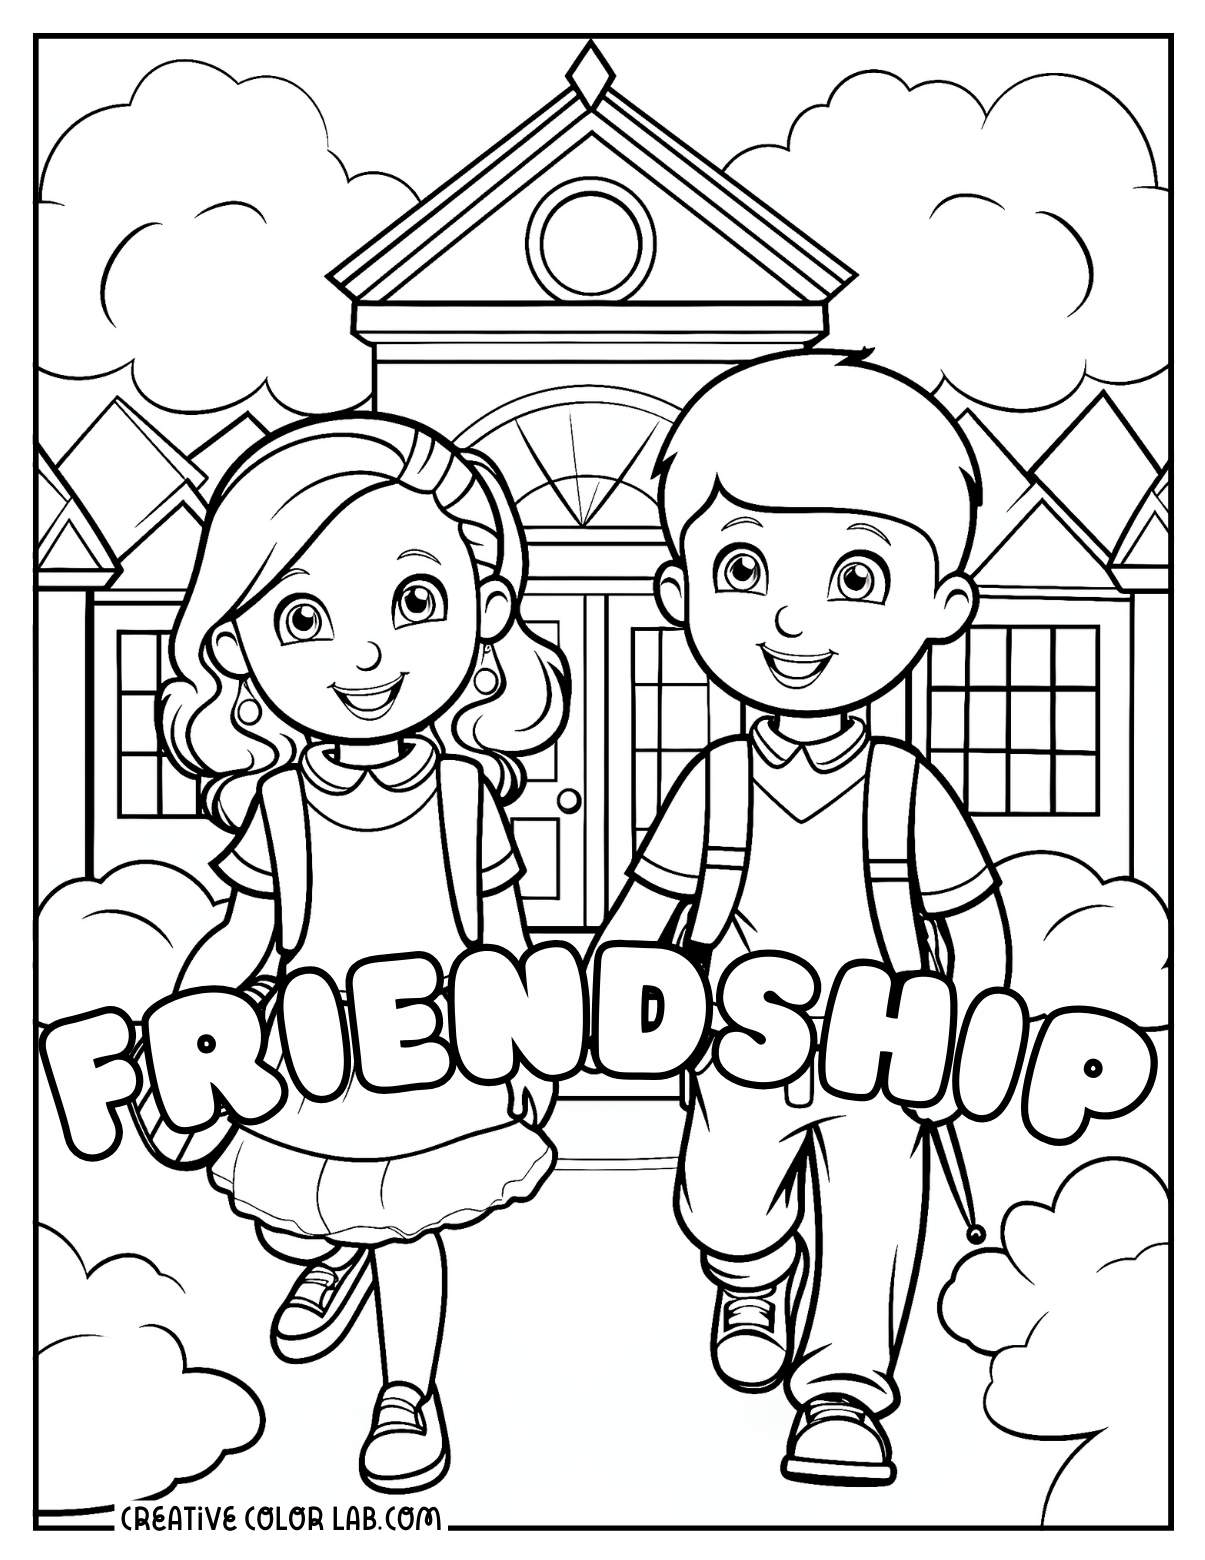 Friendship coloring pages for school.